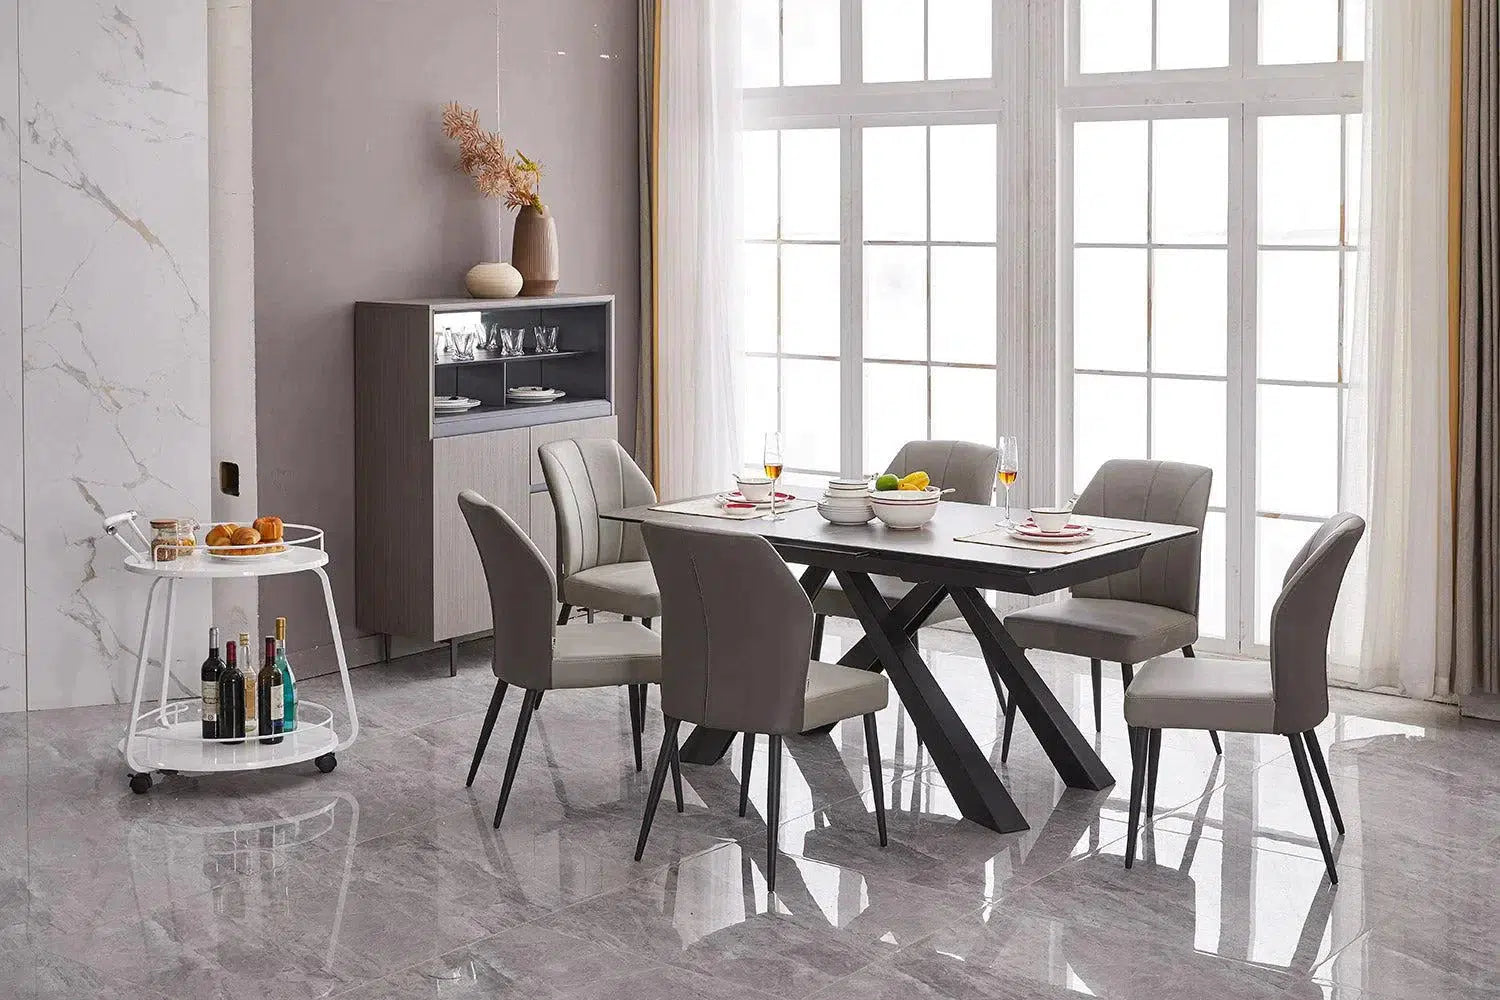 Living & Dining Room Furniture Stores in Perth & Melbourne